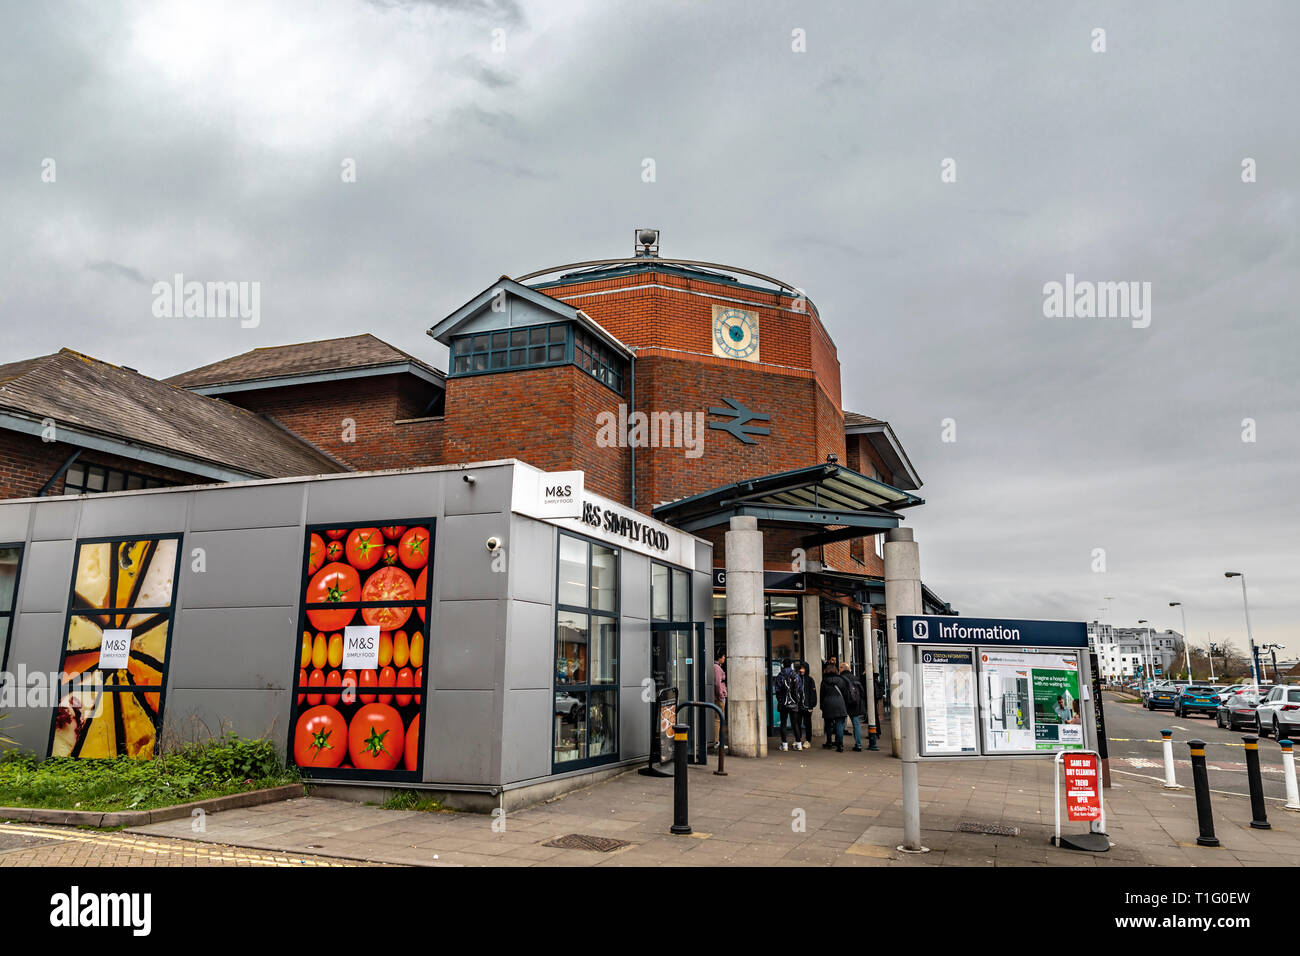 Guildford, United Kingdom - March 23, 2019: Street view of the entrance of the railway train station with Marks And Spencer shop in the medieval city  Stock Photo